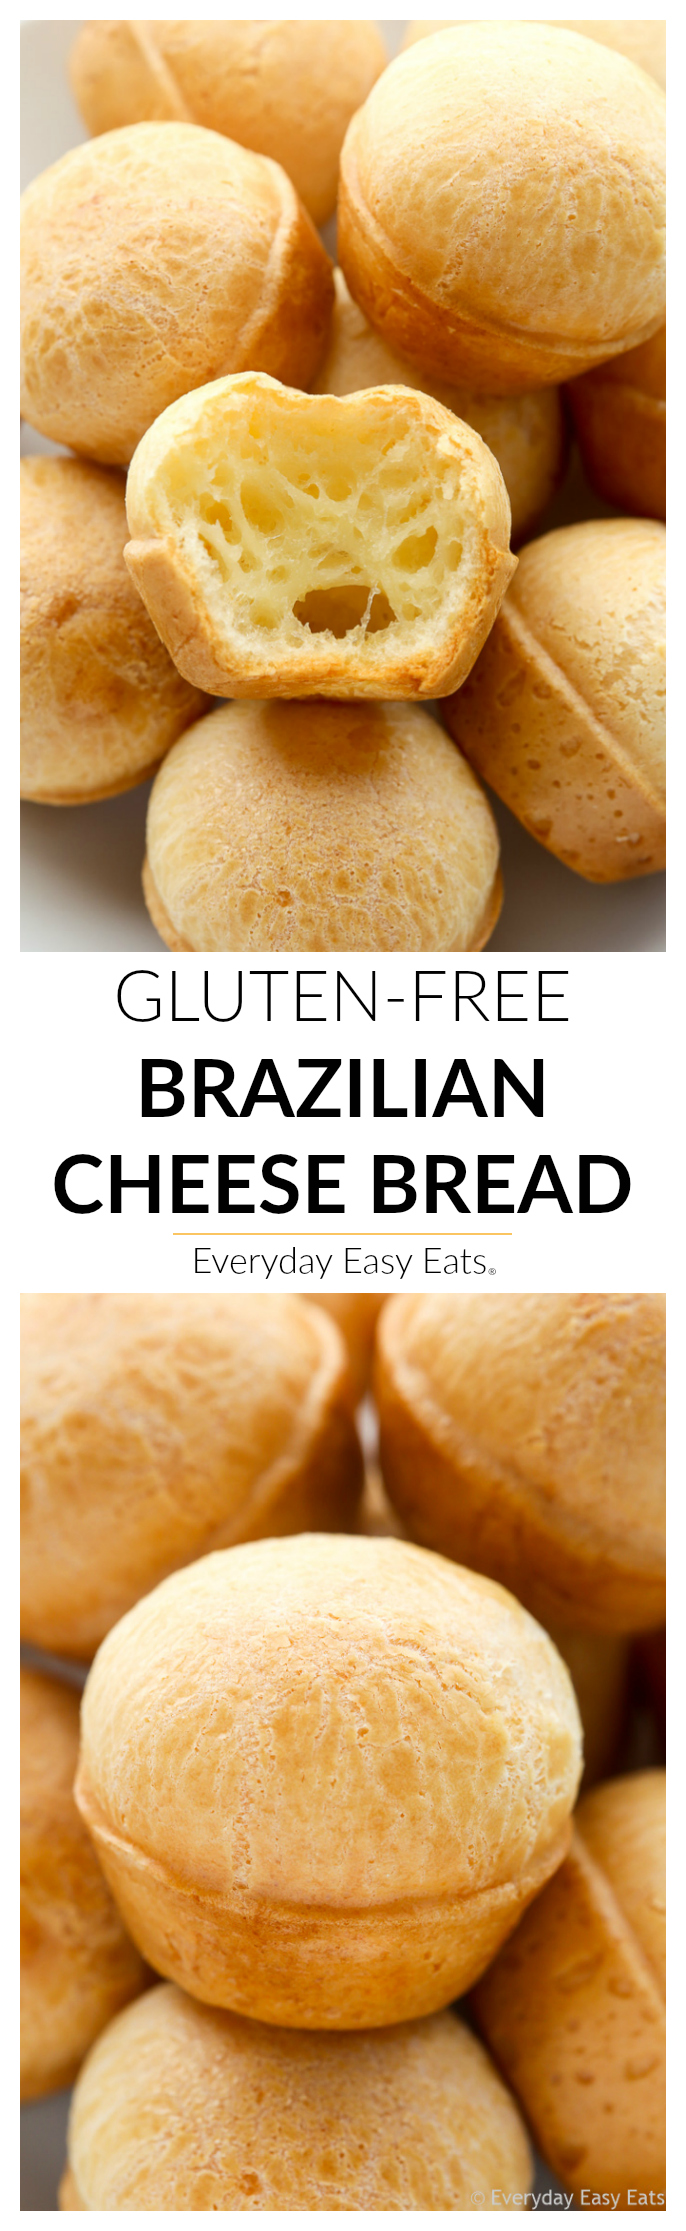 Brazilian Cheese Bread - A delicious gluten-free bread that is so easy to make. | Recipe at EverydayEasyEats.com